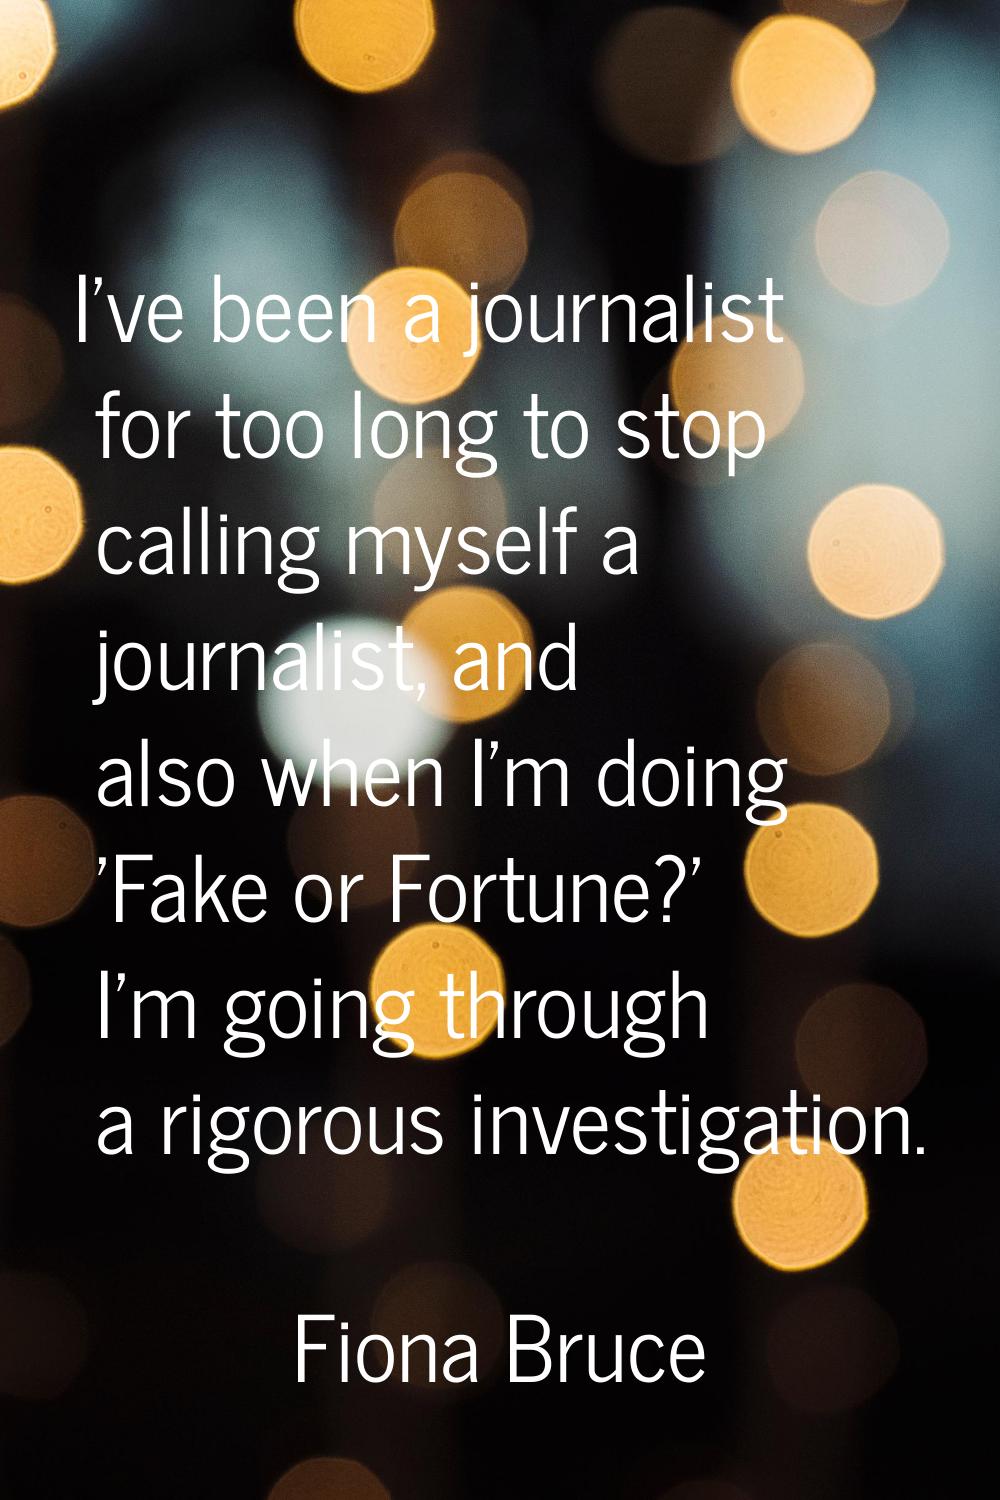 I've been a journalist for too long to stop calling myself a journalist, and also when I'm doing 'F